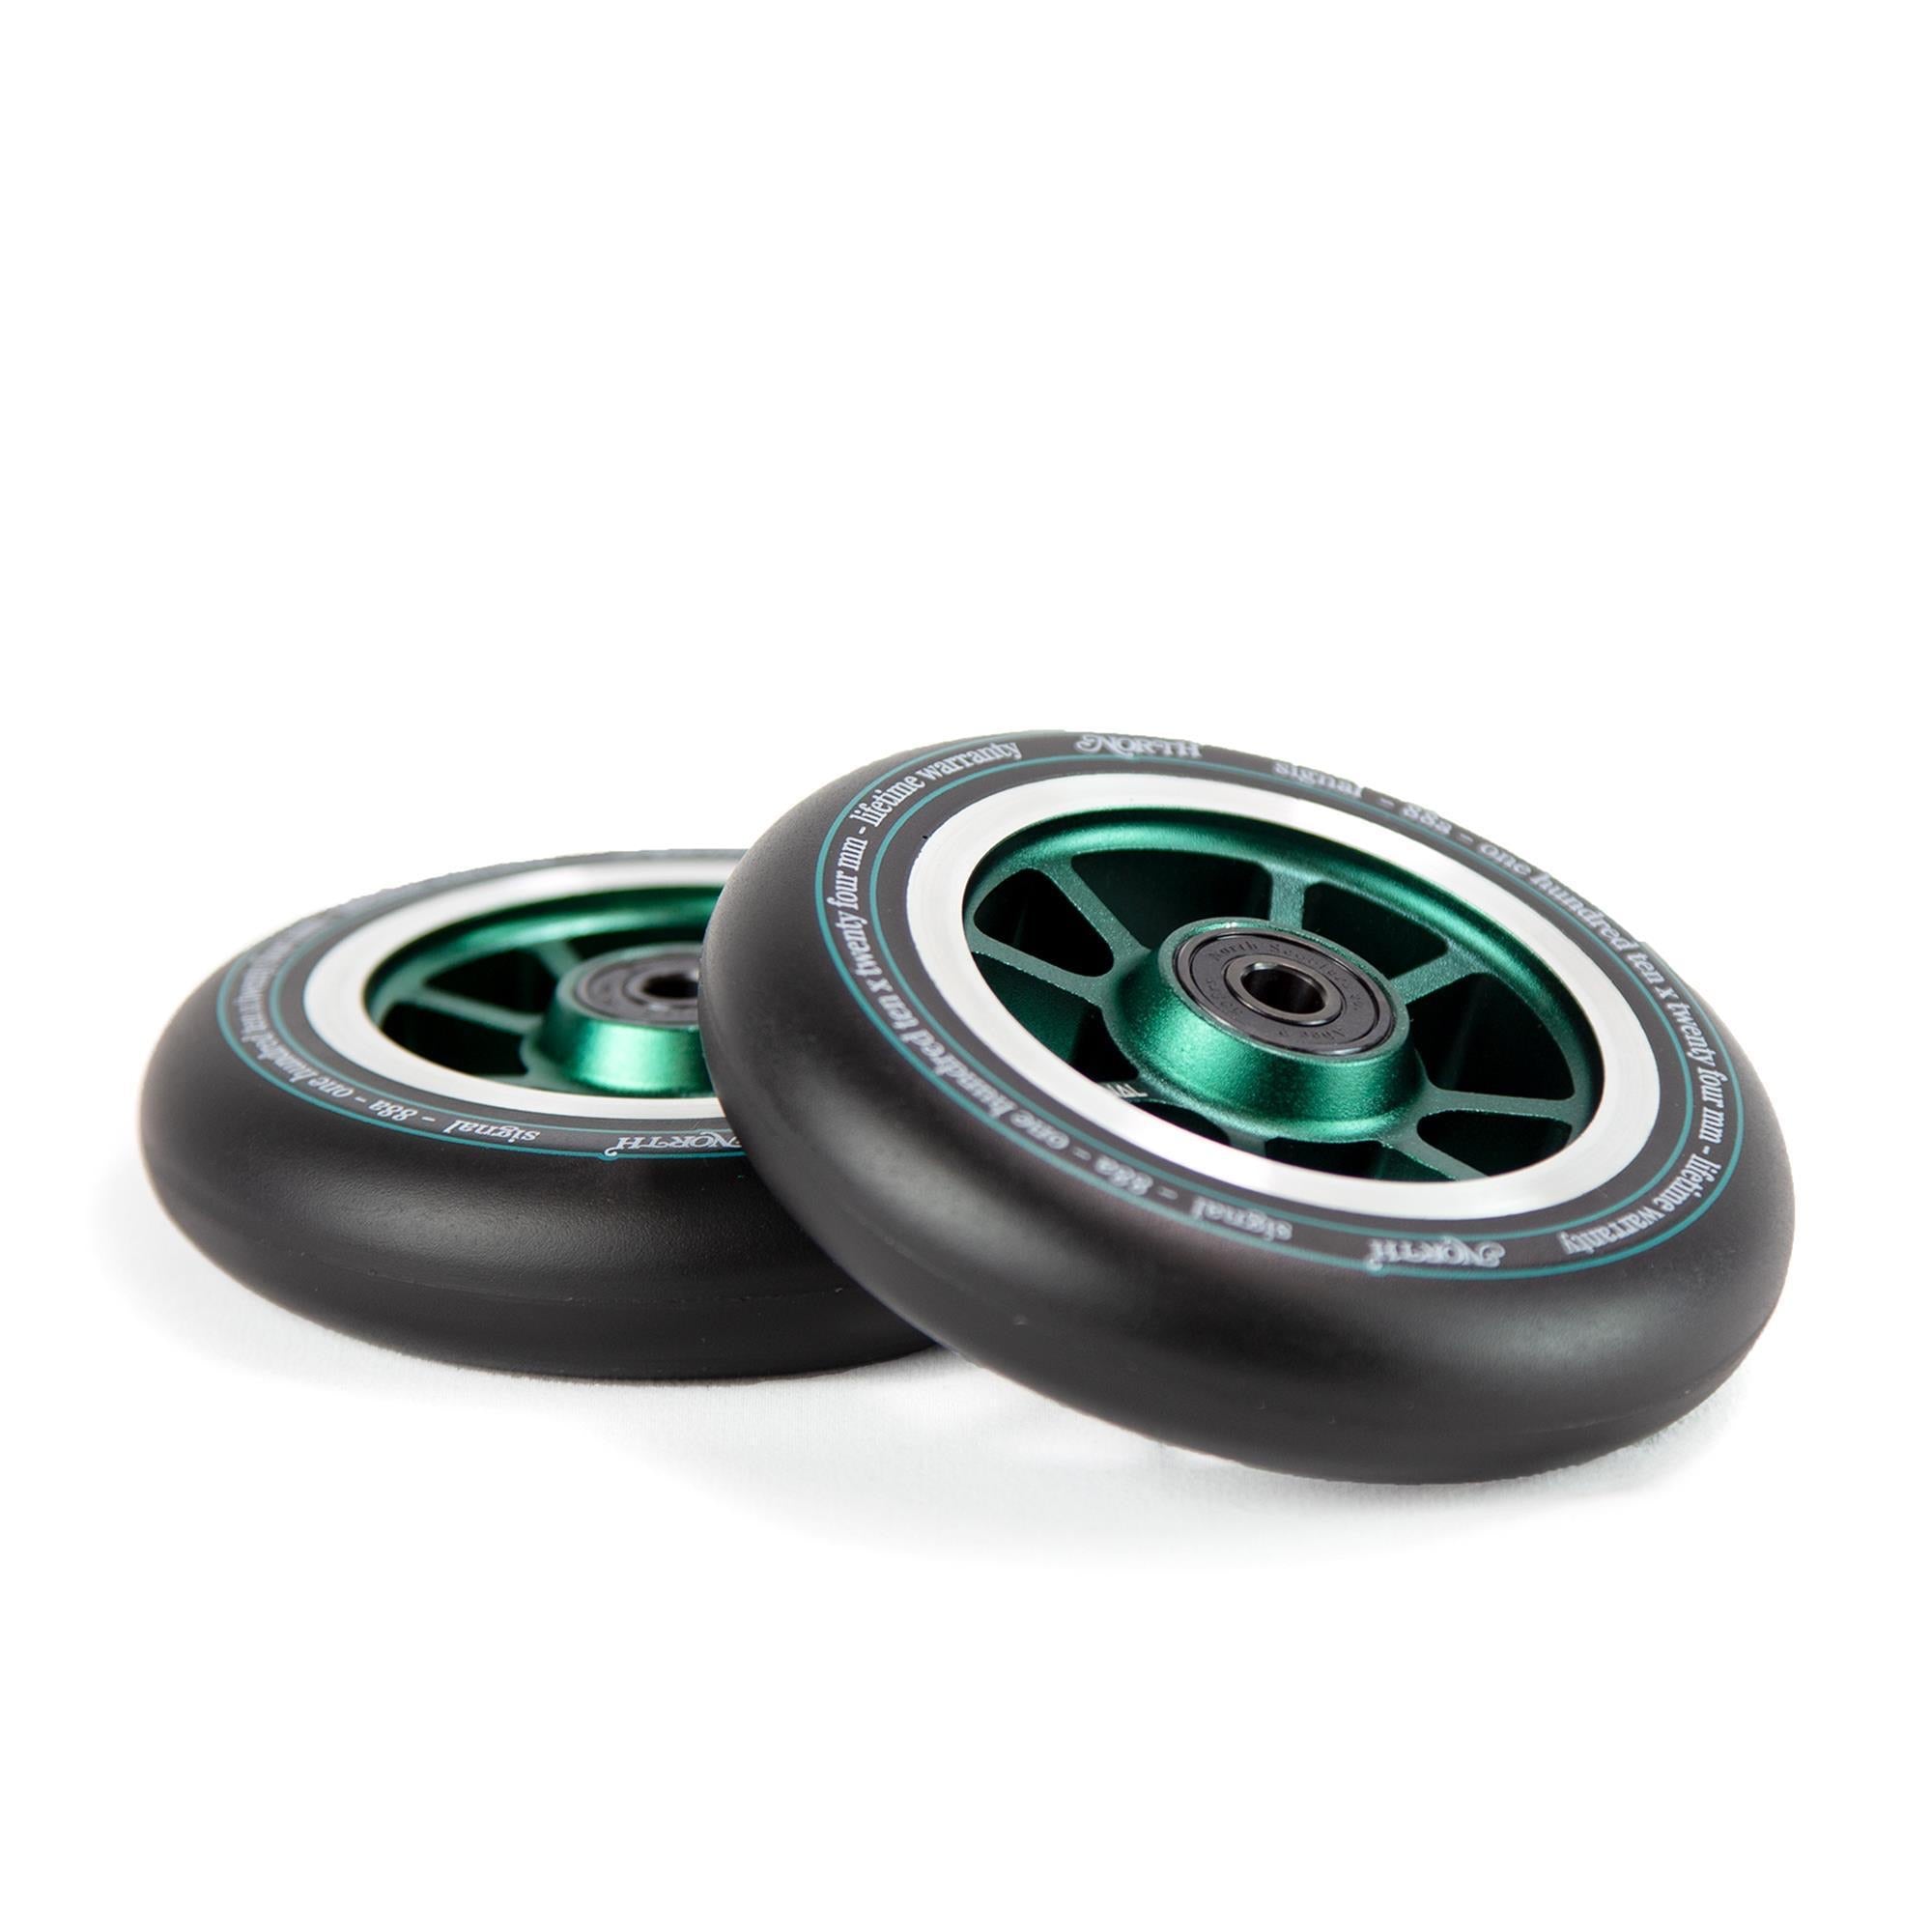 North Scooters Signal Wheels 110mm